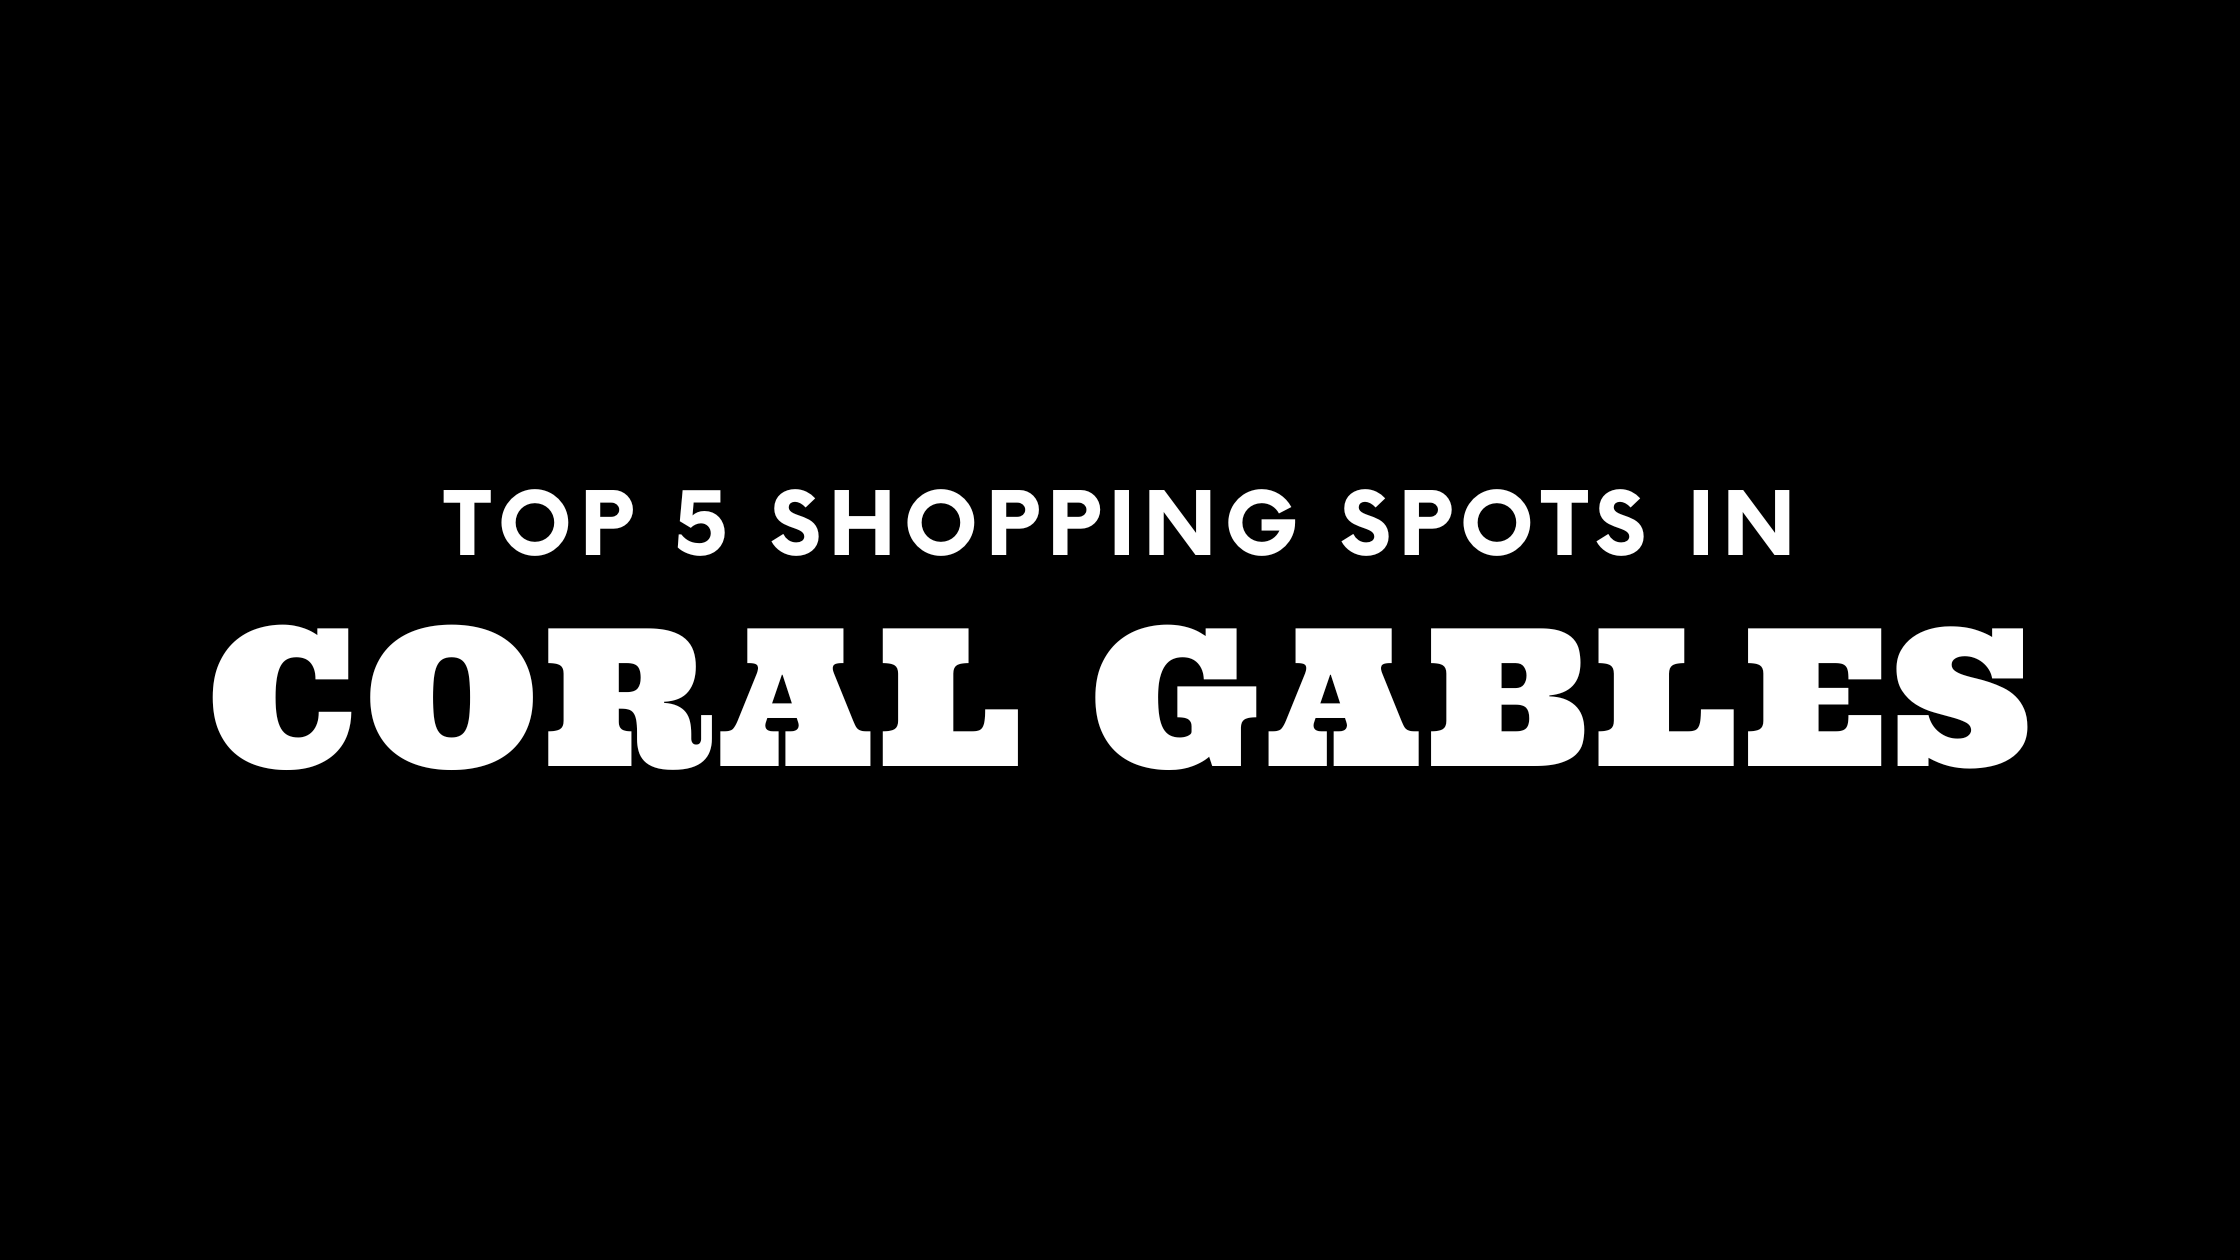 Top 5 Shopping Spots in Coral Gables